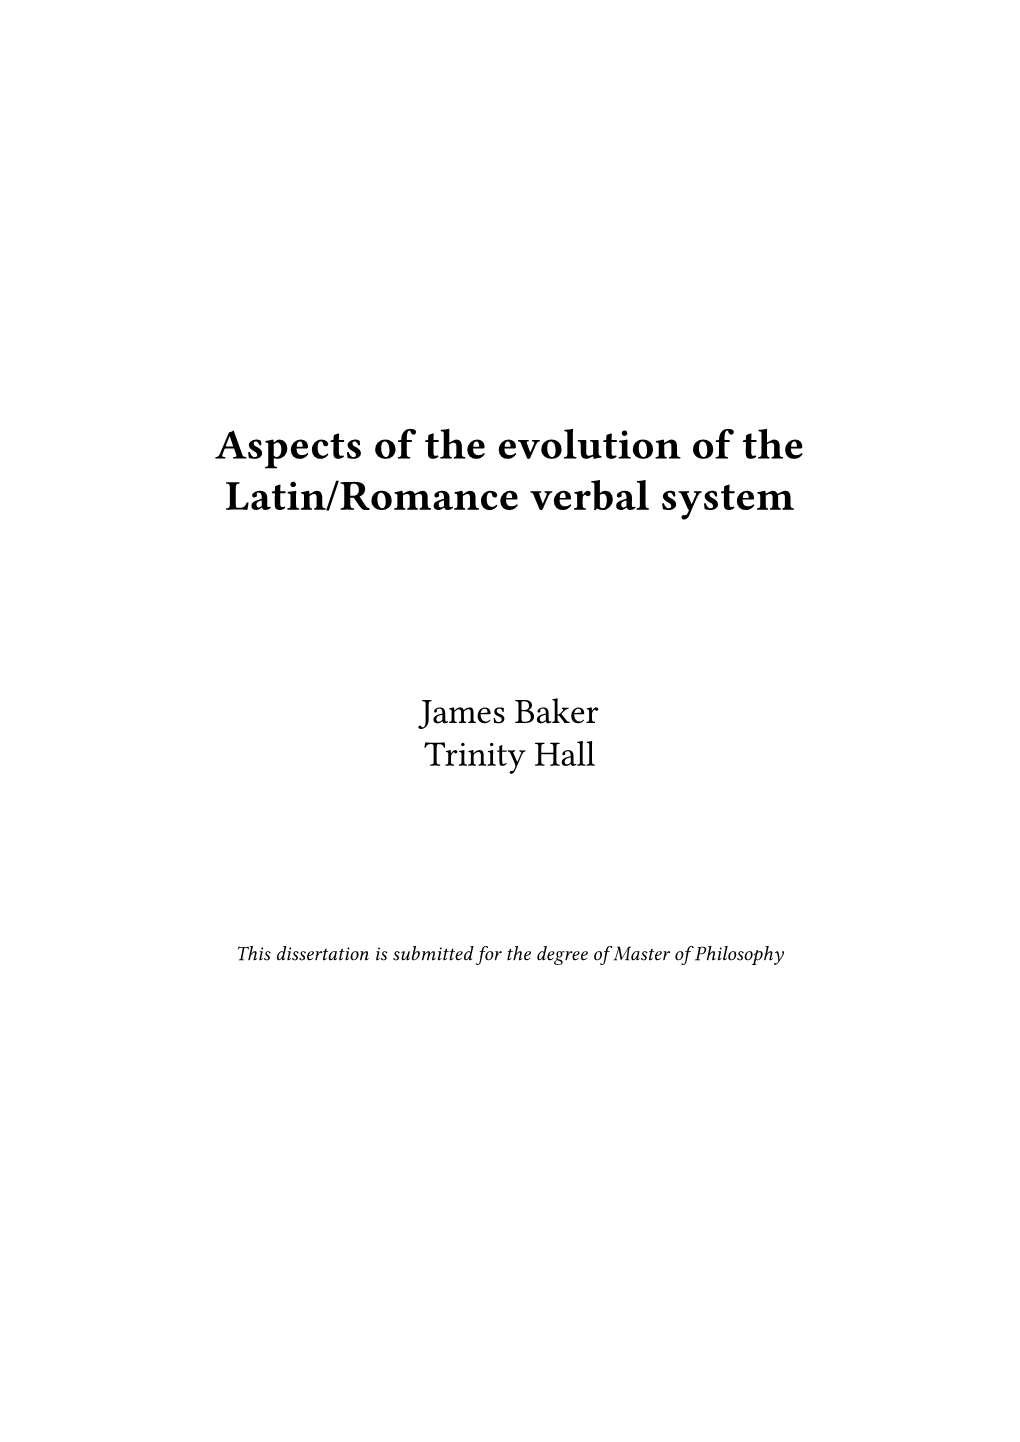 Aspects of the Evolution of the Latin/Romance Verbal System